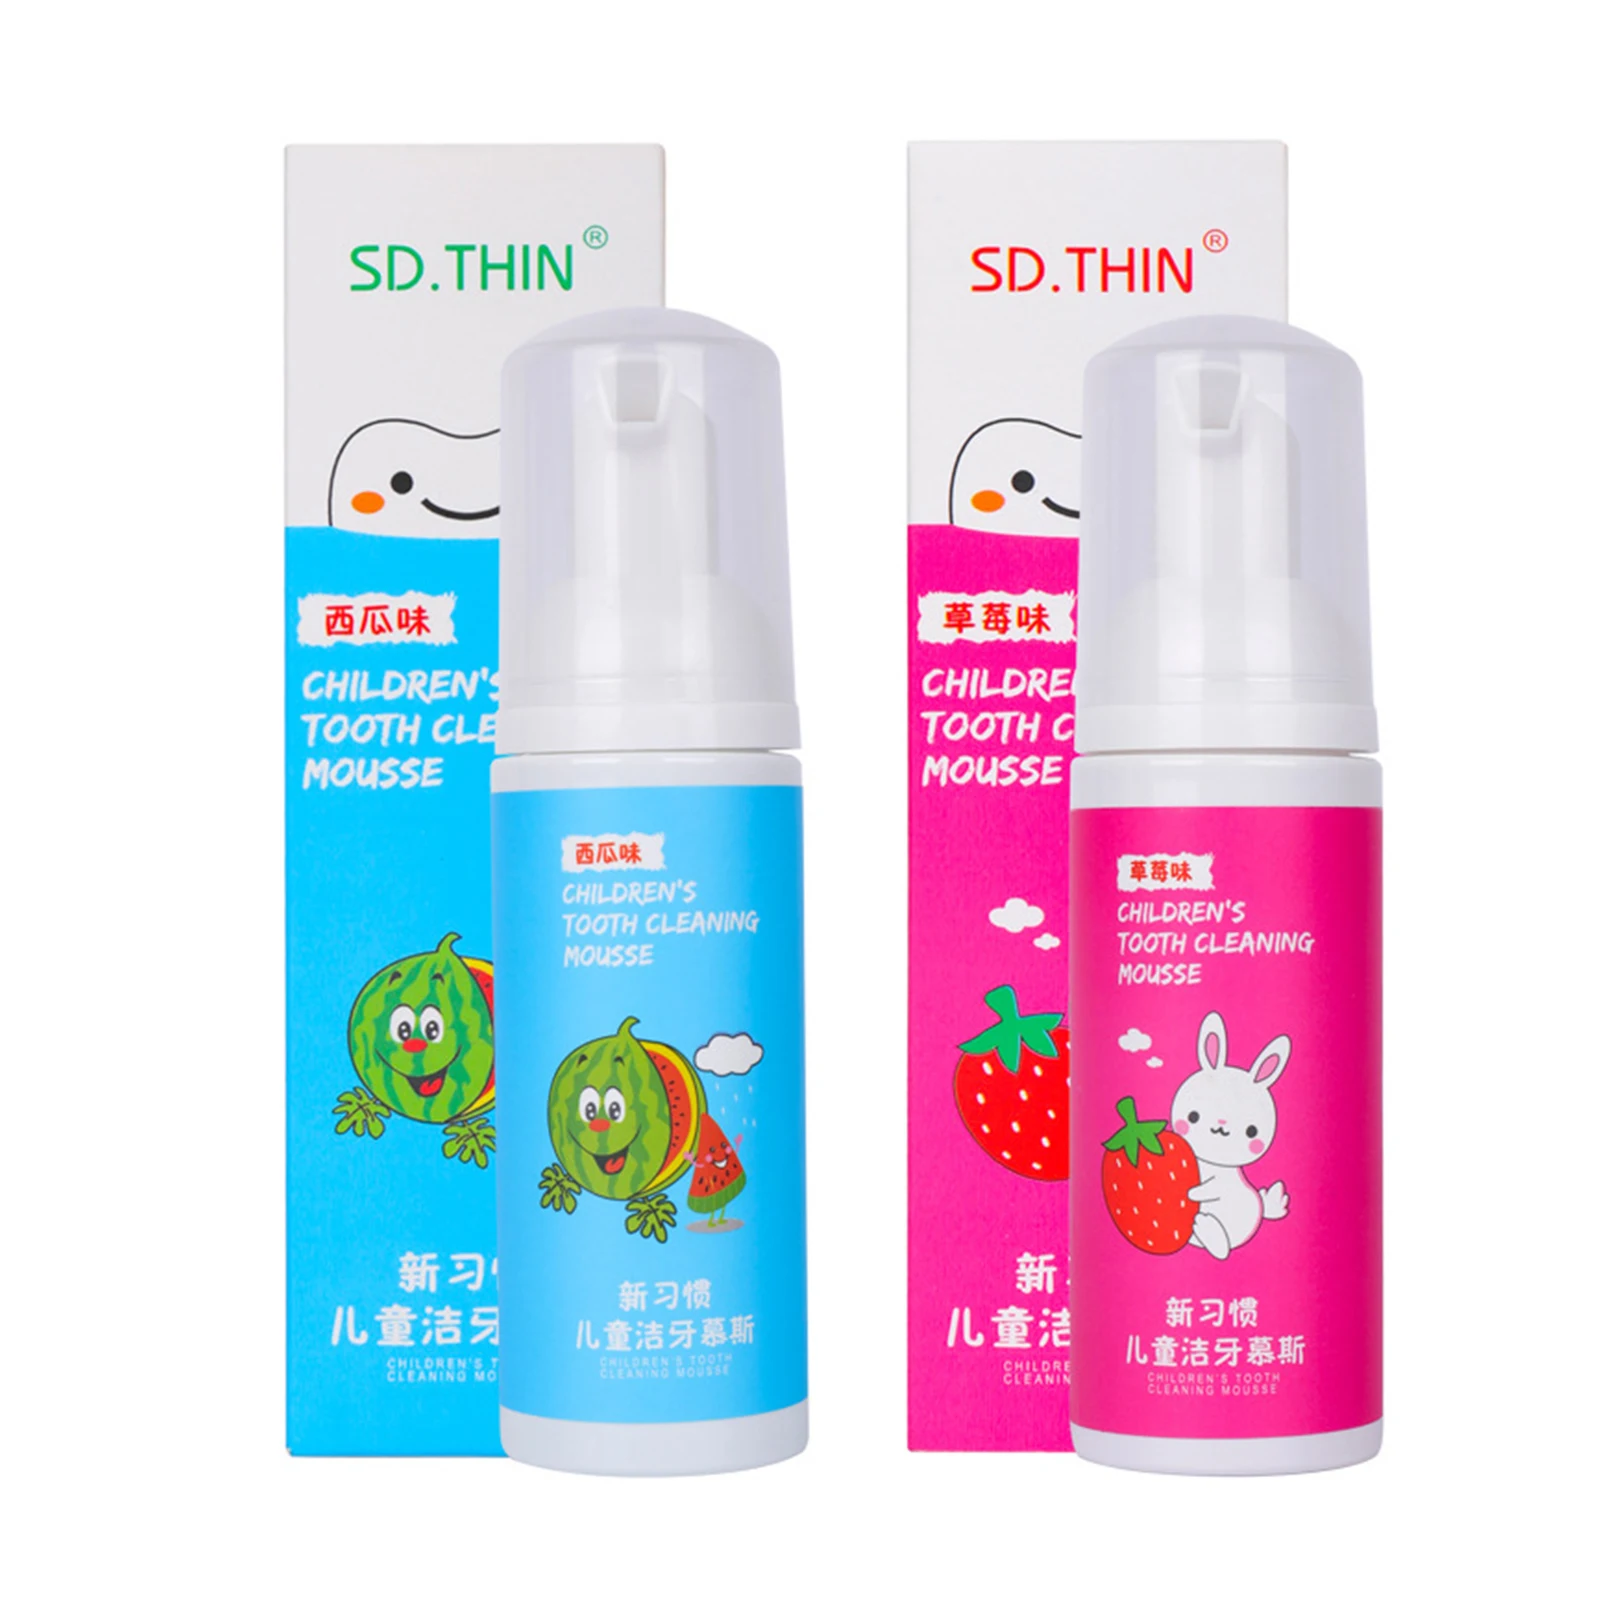 

60ml Strawberry Foam Toothpaste Stain Removal Teeth Mouth Cleaning Toothpaste Whitening Mousse Tooth Paste Dental Care Tool